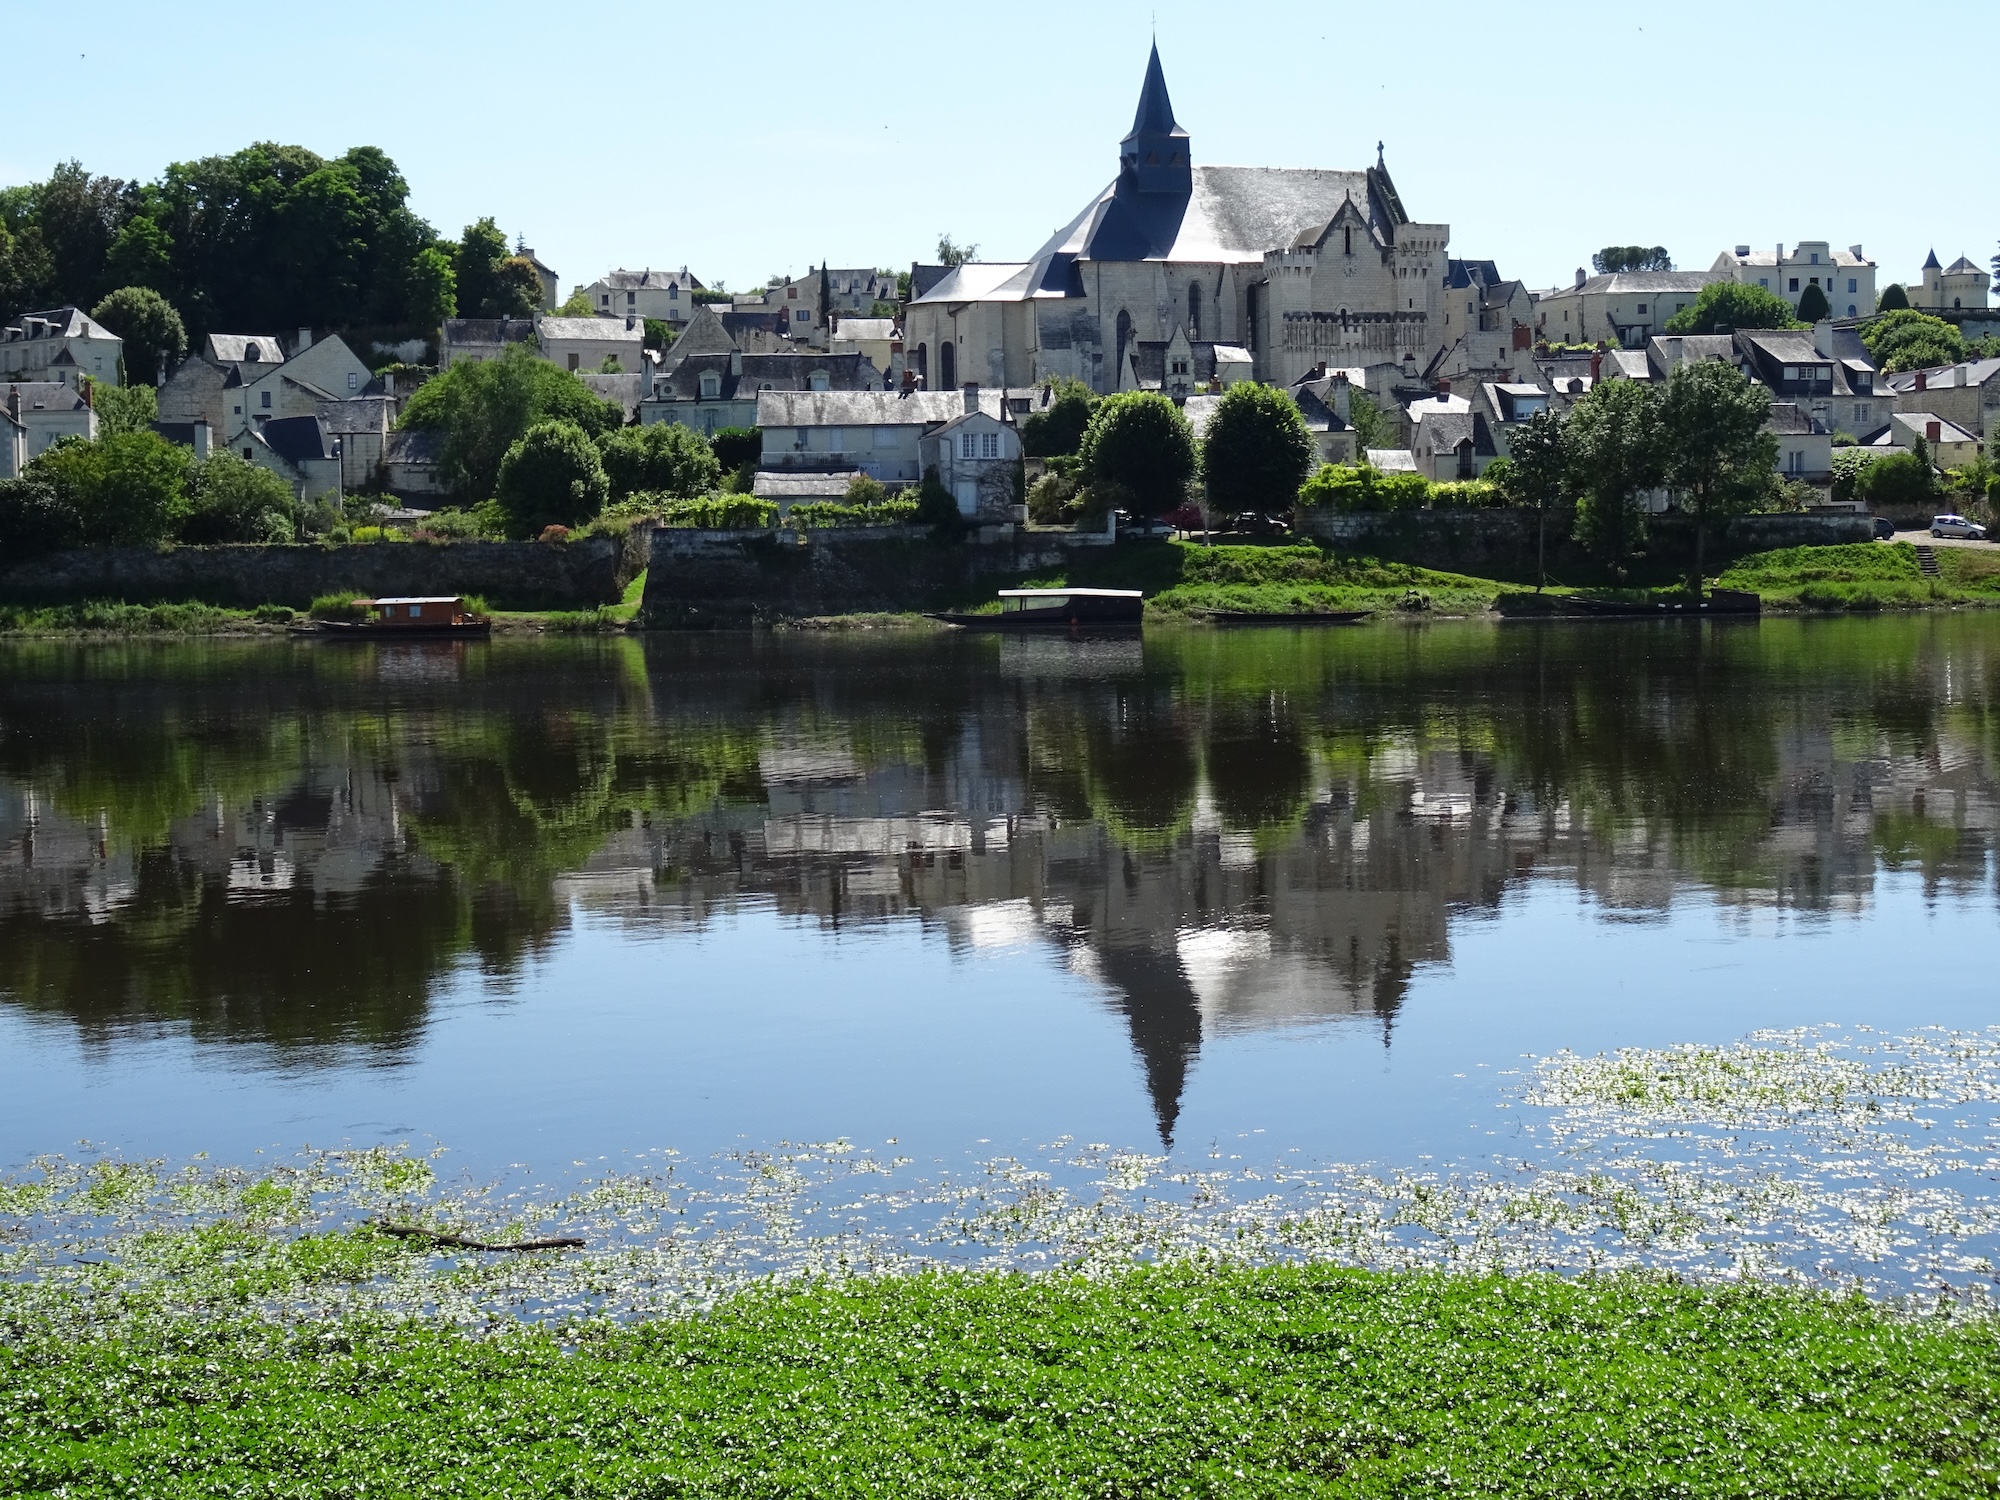 The old stone abbey and the village of Candes St Martin reflecting in the river in France on a hot summer day